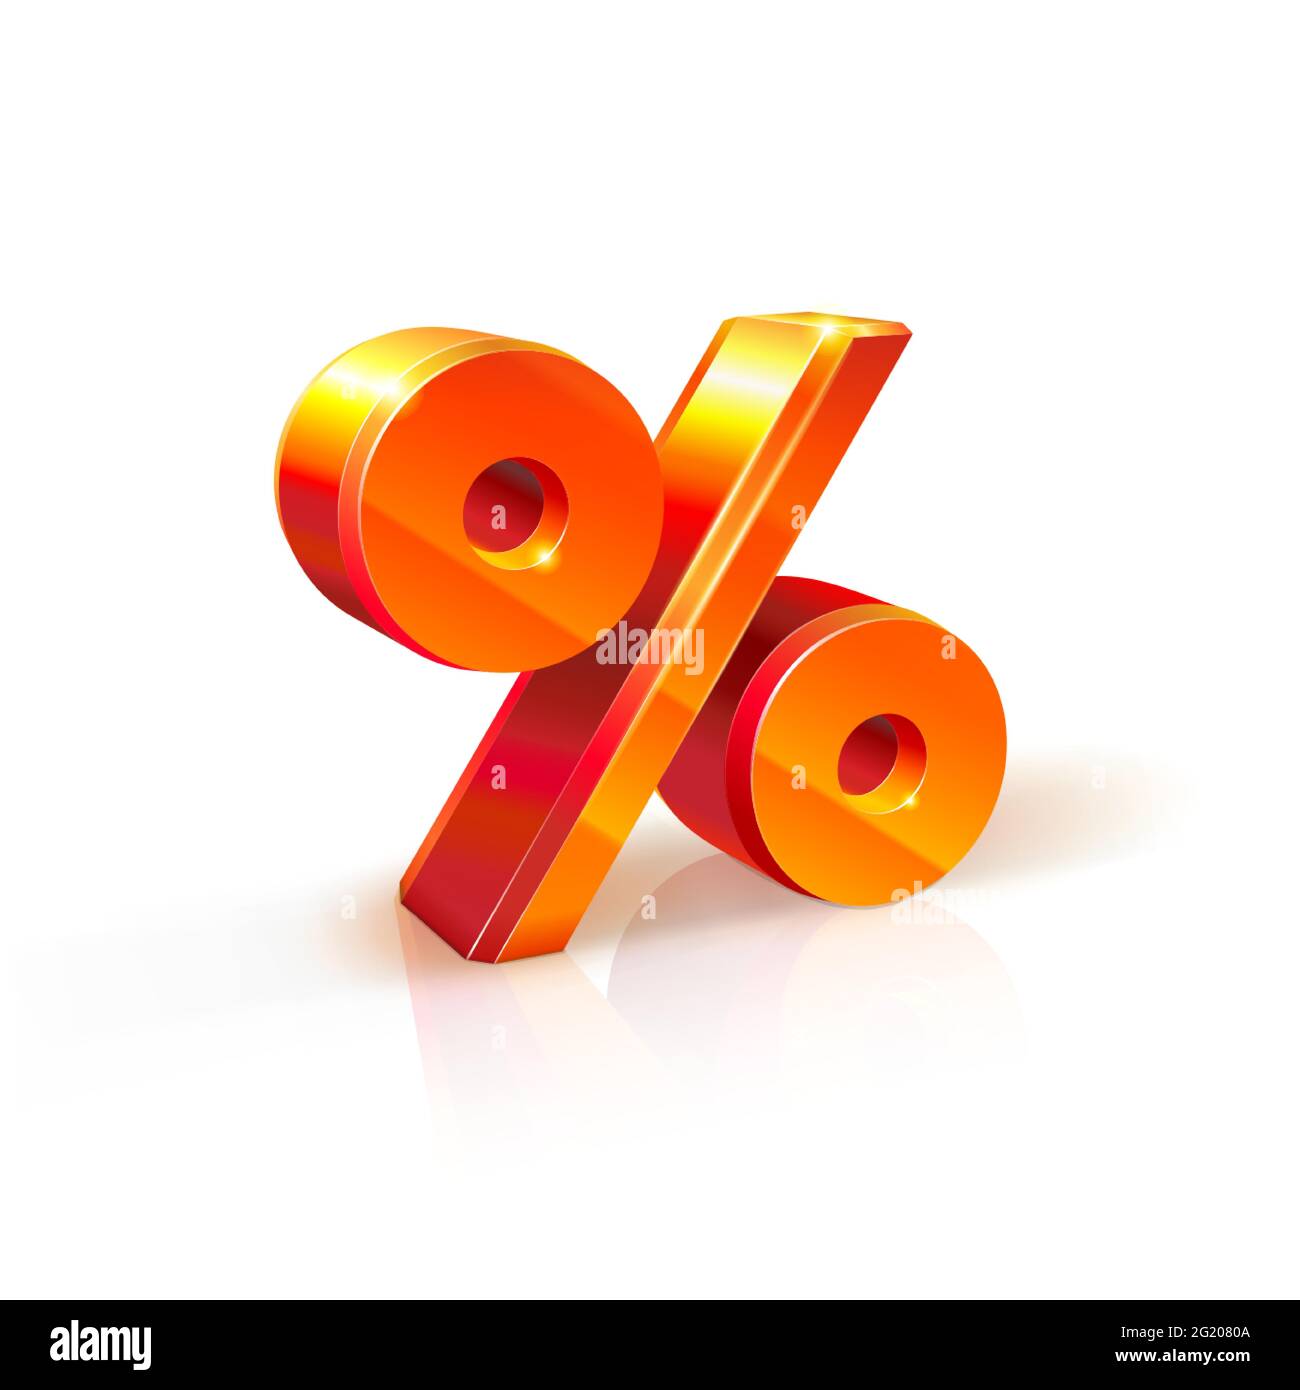 3d orange-red realistic volumetric percent % sign image. Isolated on white background. discounts, sales, advertising purposes Stock Vector